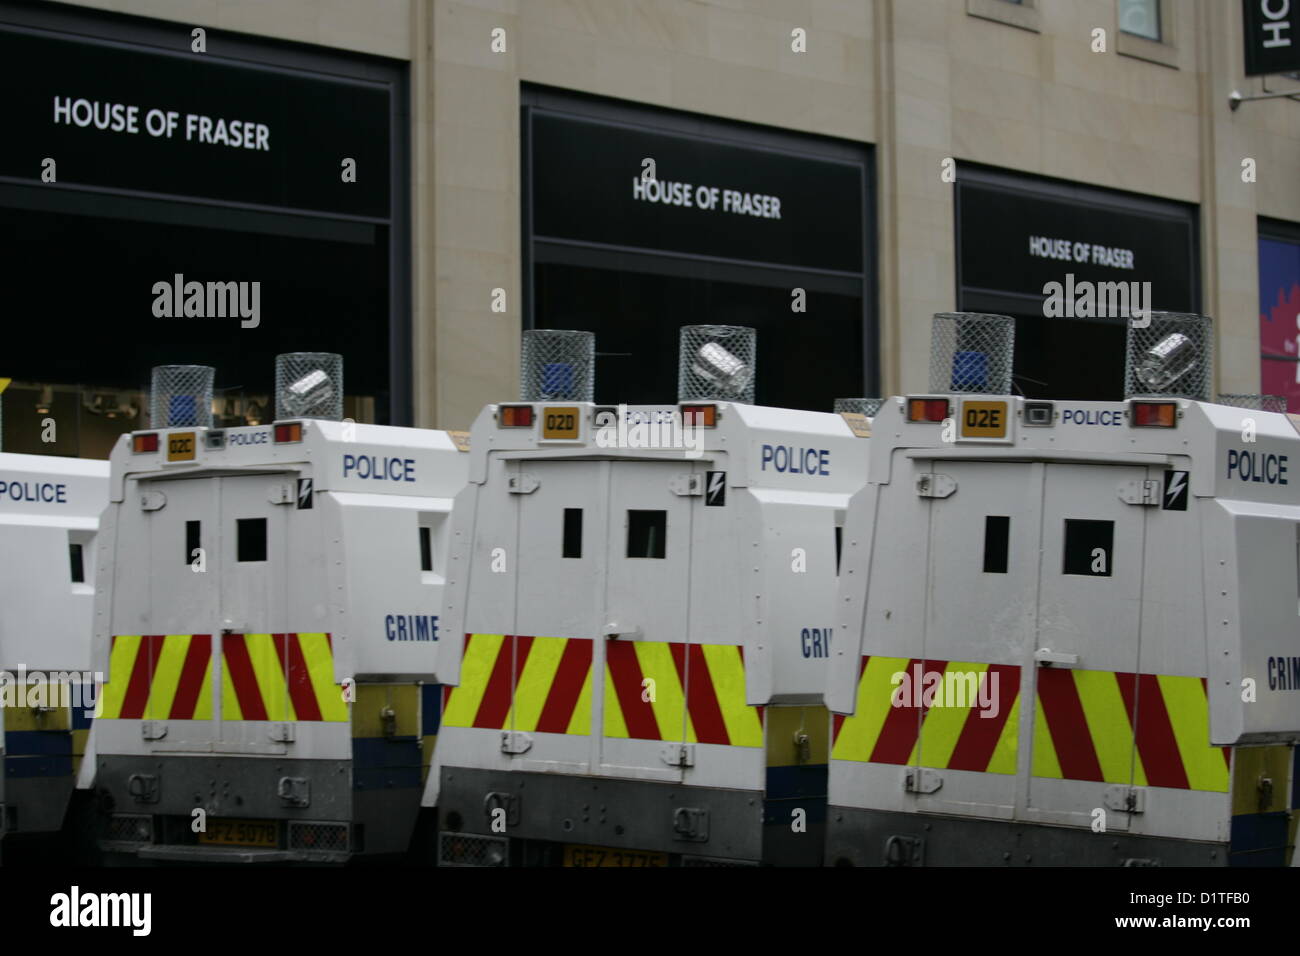 PSNI Landrovers pass the House of Fraser department store in Belfast , during the ongoing flag protest after Belfast City Council voted on the 3rd of December 2012 to restrict the flying the Union Jack flag from City hall to 17 days per year, where previously it flew every day of the year. Belfast, Northern Ireland. Bonzo/Alamy Live News Stock Photo